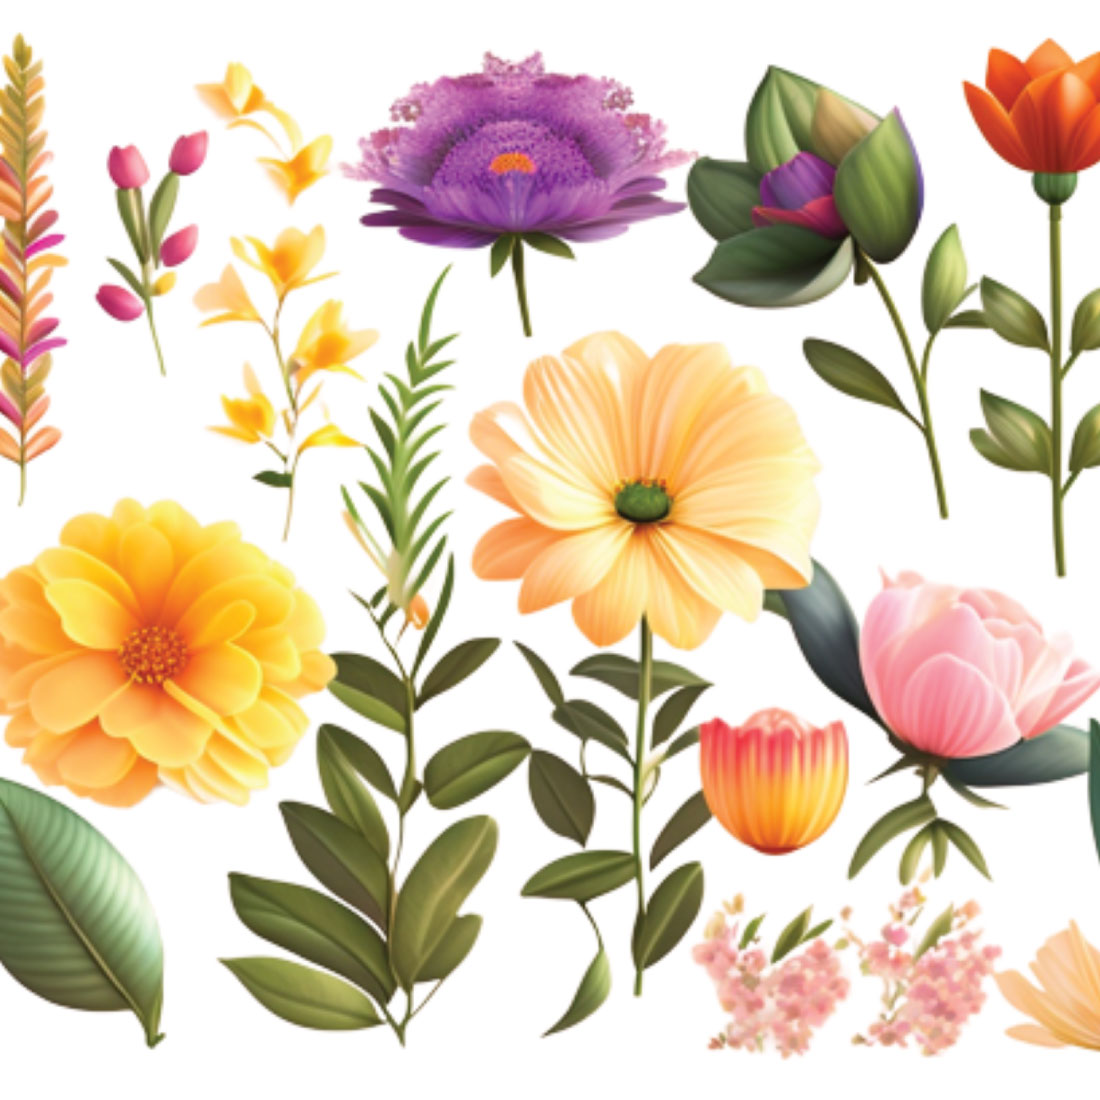 1000 + Plus set Bundle of Wild Flowers Png for 7$ Only cover image.